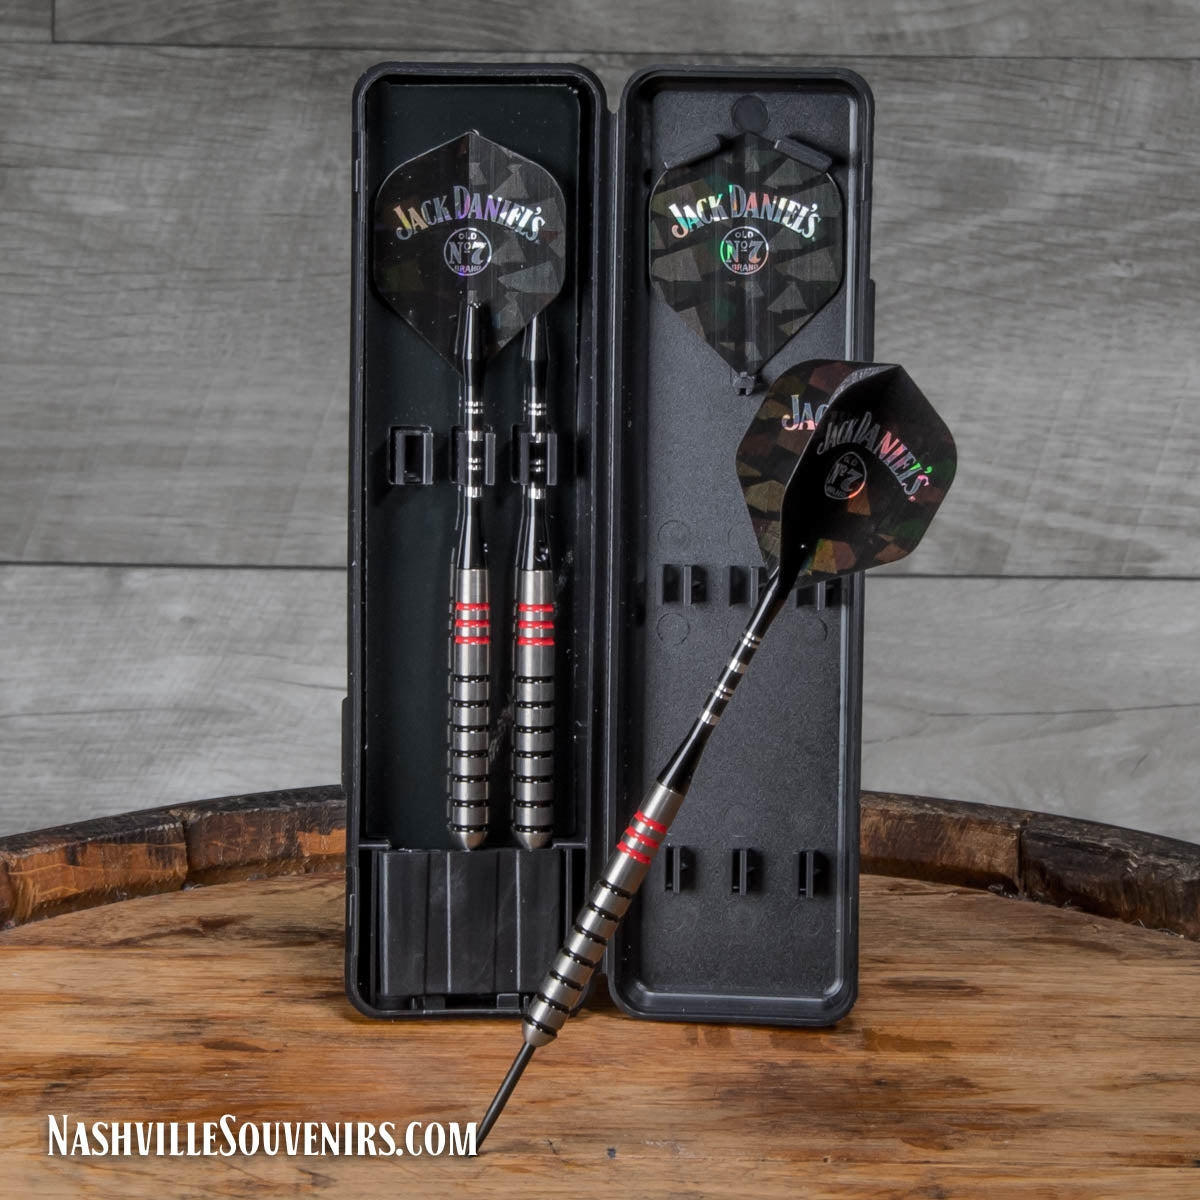 Grab the gang for a game of darts with this Jack Daniels Dart Set. Get yours today with FREE SHIPPING in the continental United States.